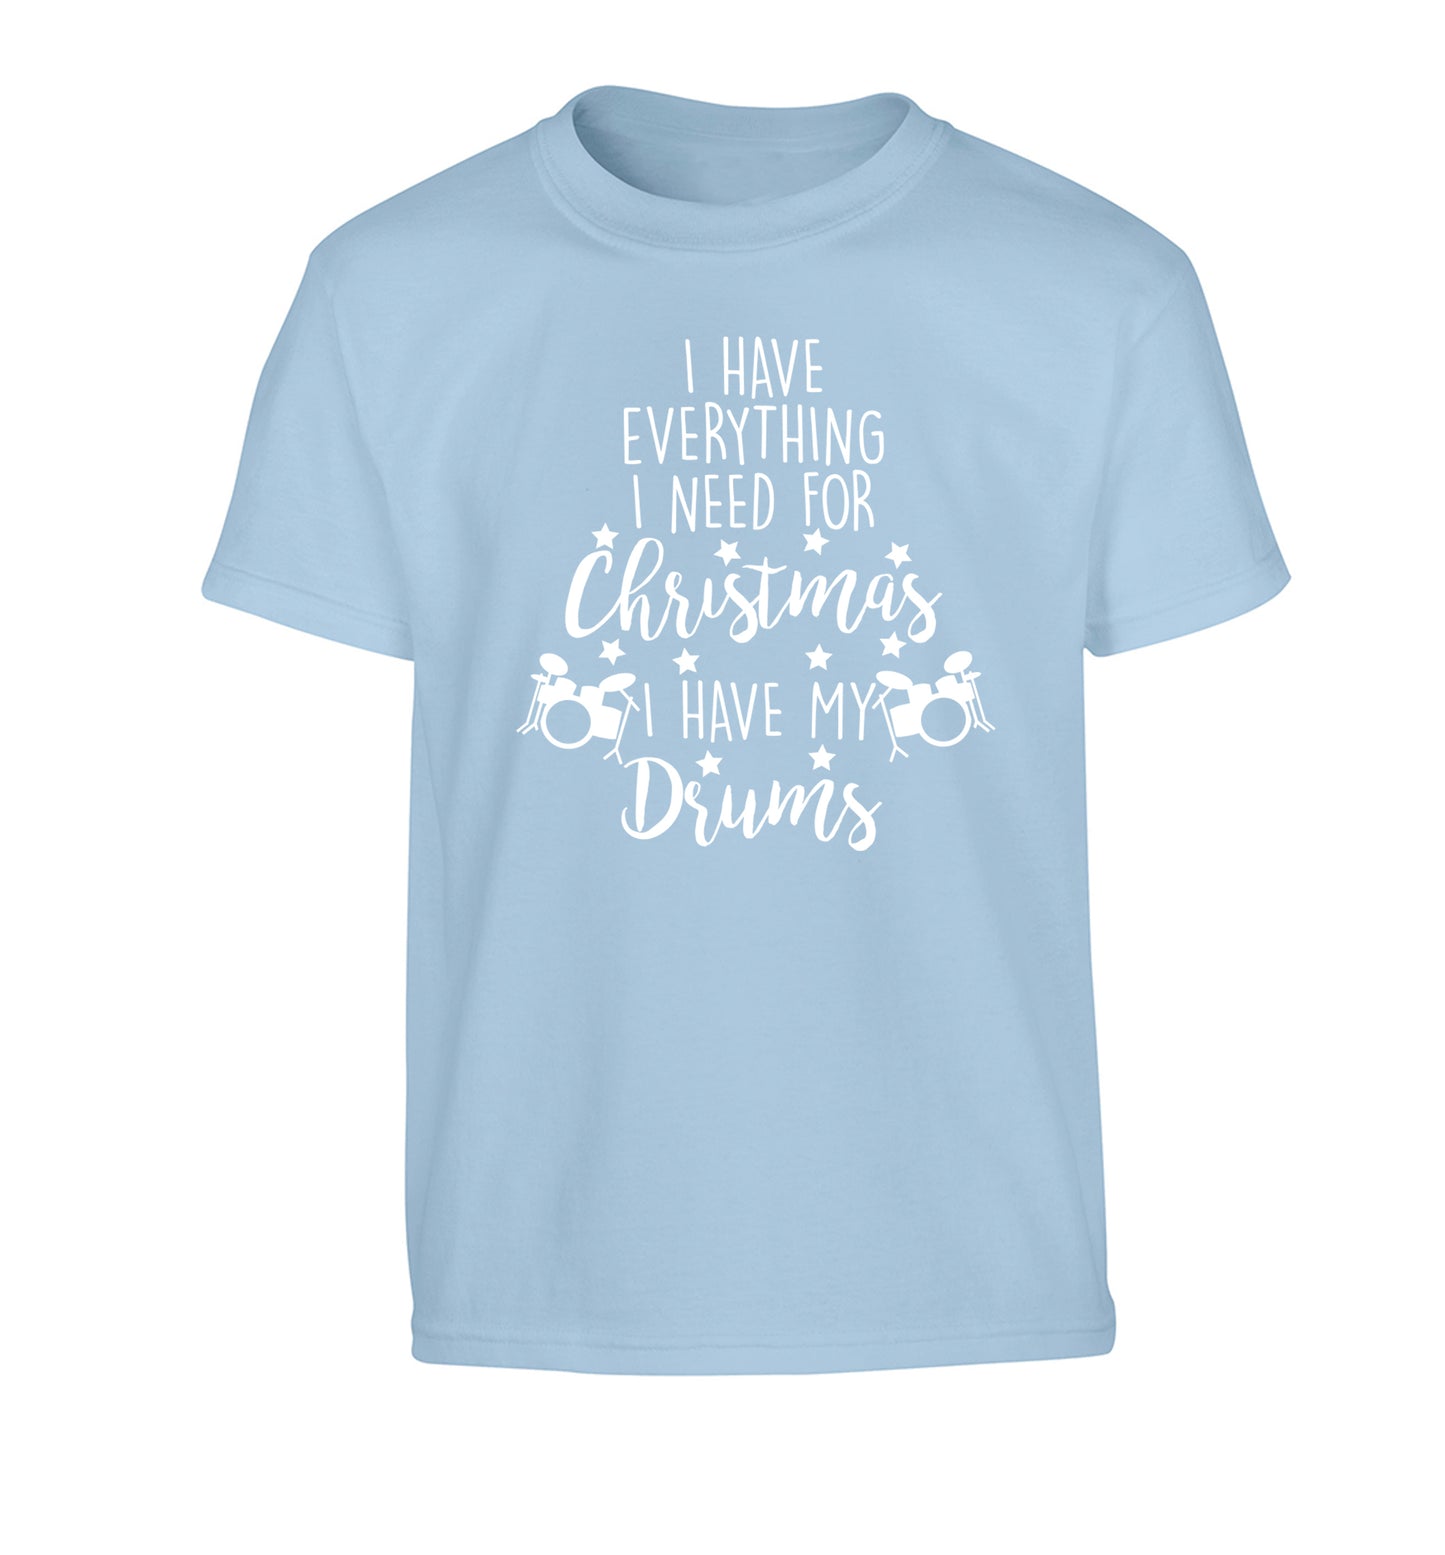 I have everything I need for Christmas I have my drums! Children's light blue Tshirt 12-14 Years